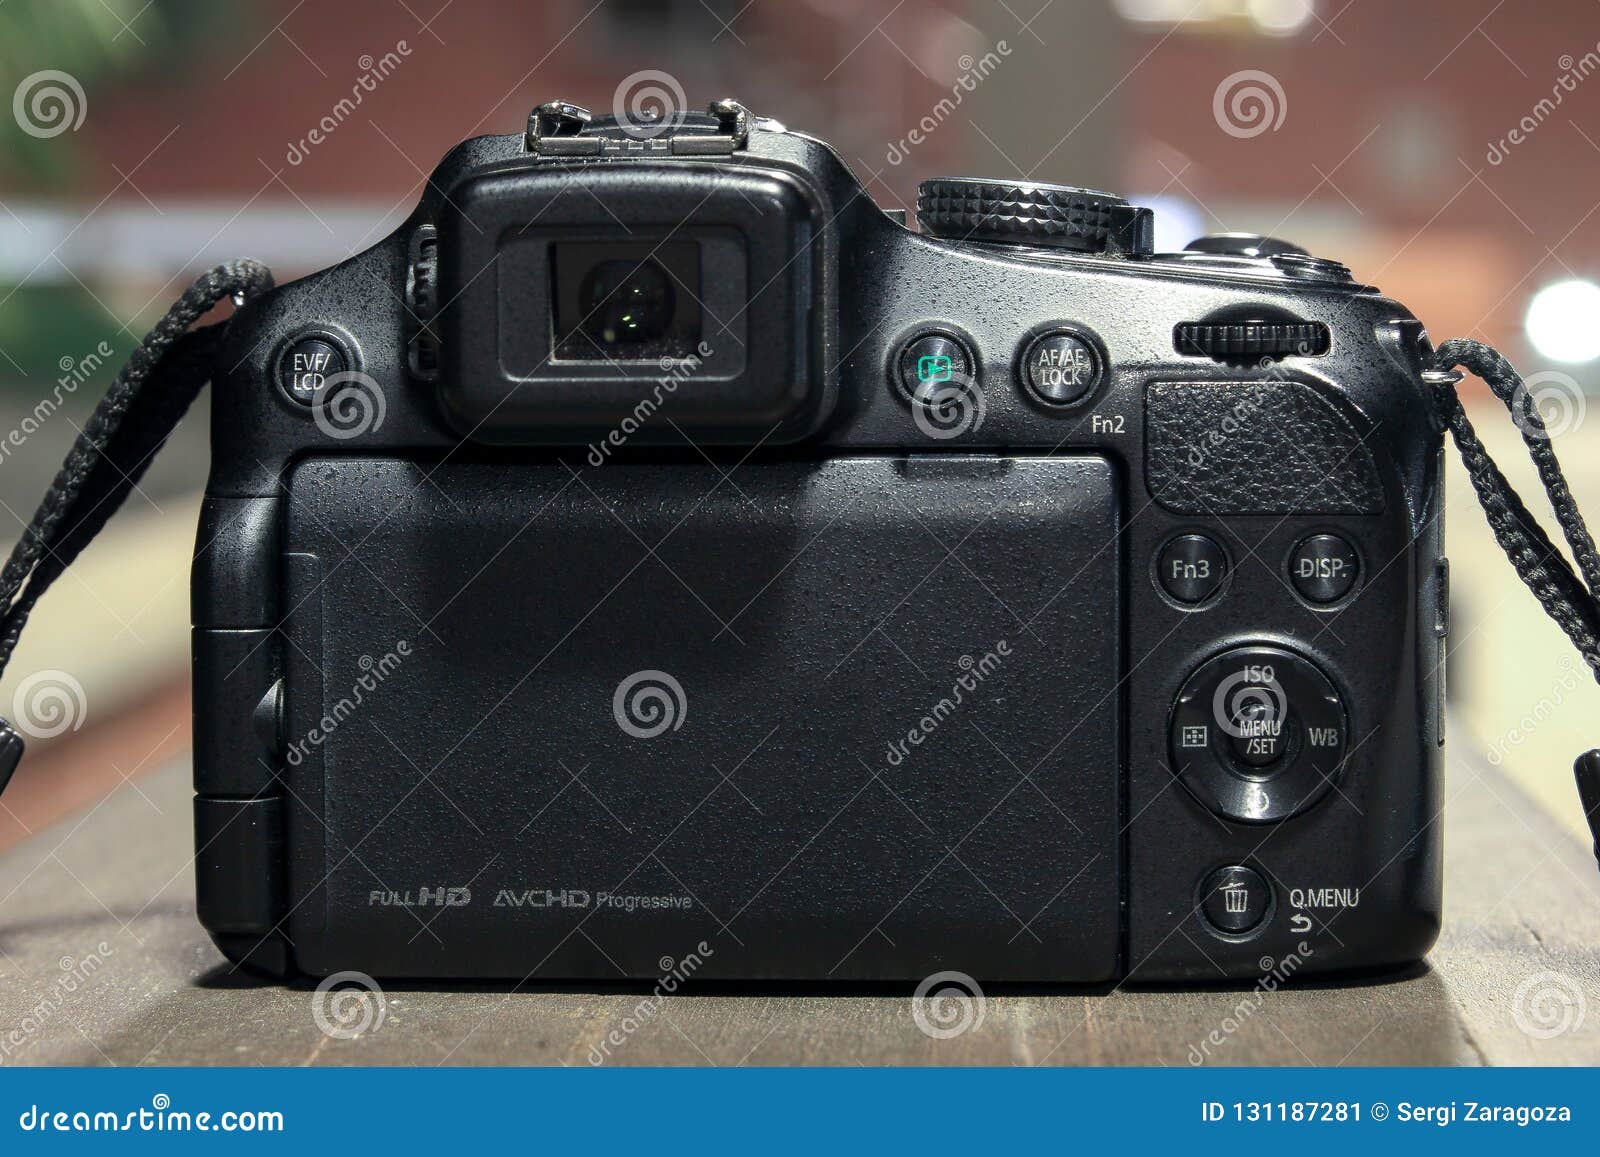 DSLR on Blurry Background with Lights Stock Image - Image of camera, glass:  131187281